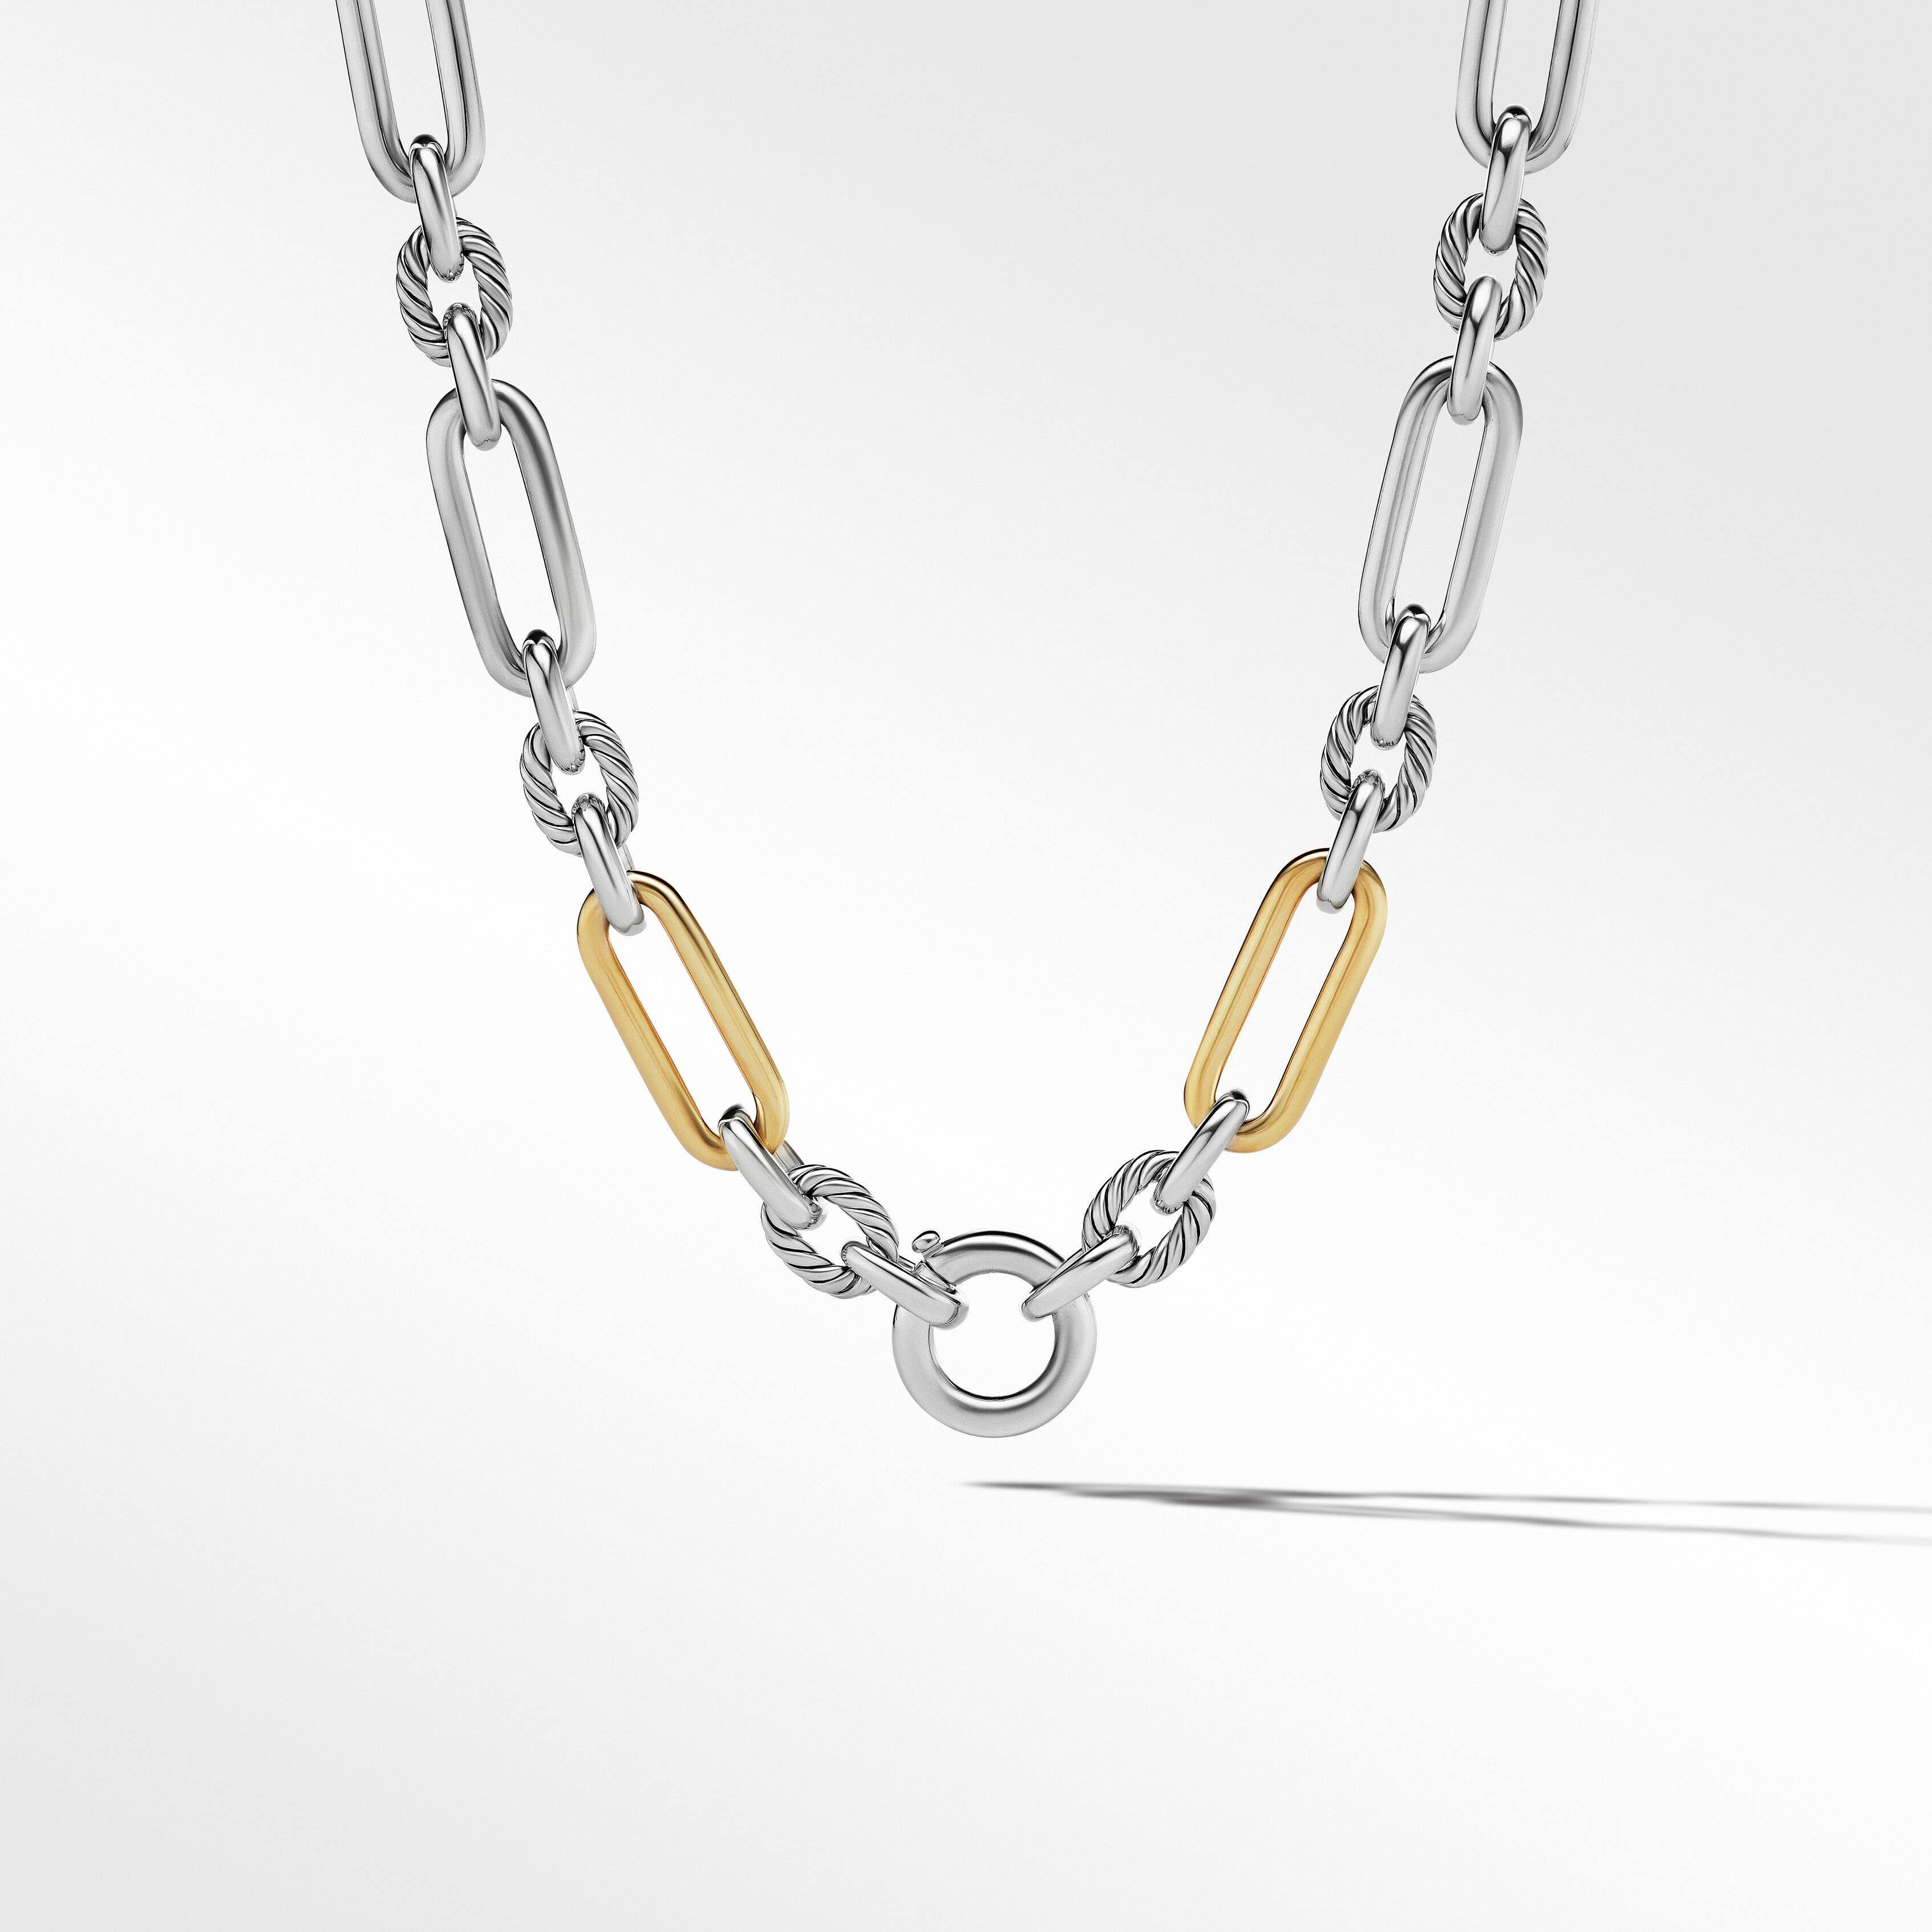 Lexington Chain Necklace with 18K Yellow Gold